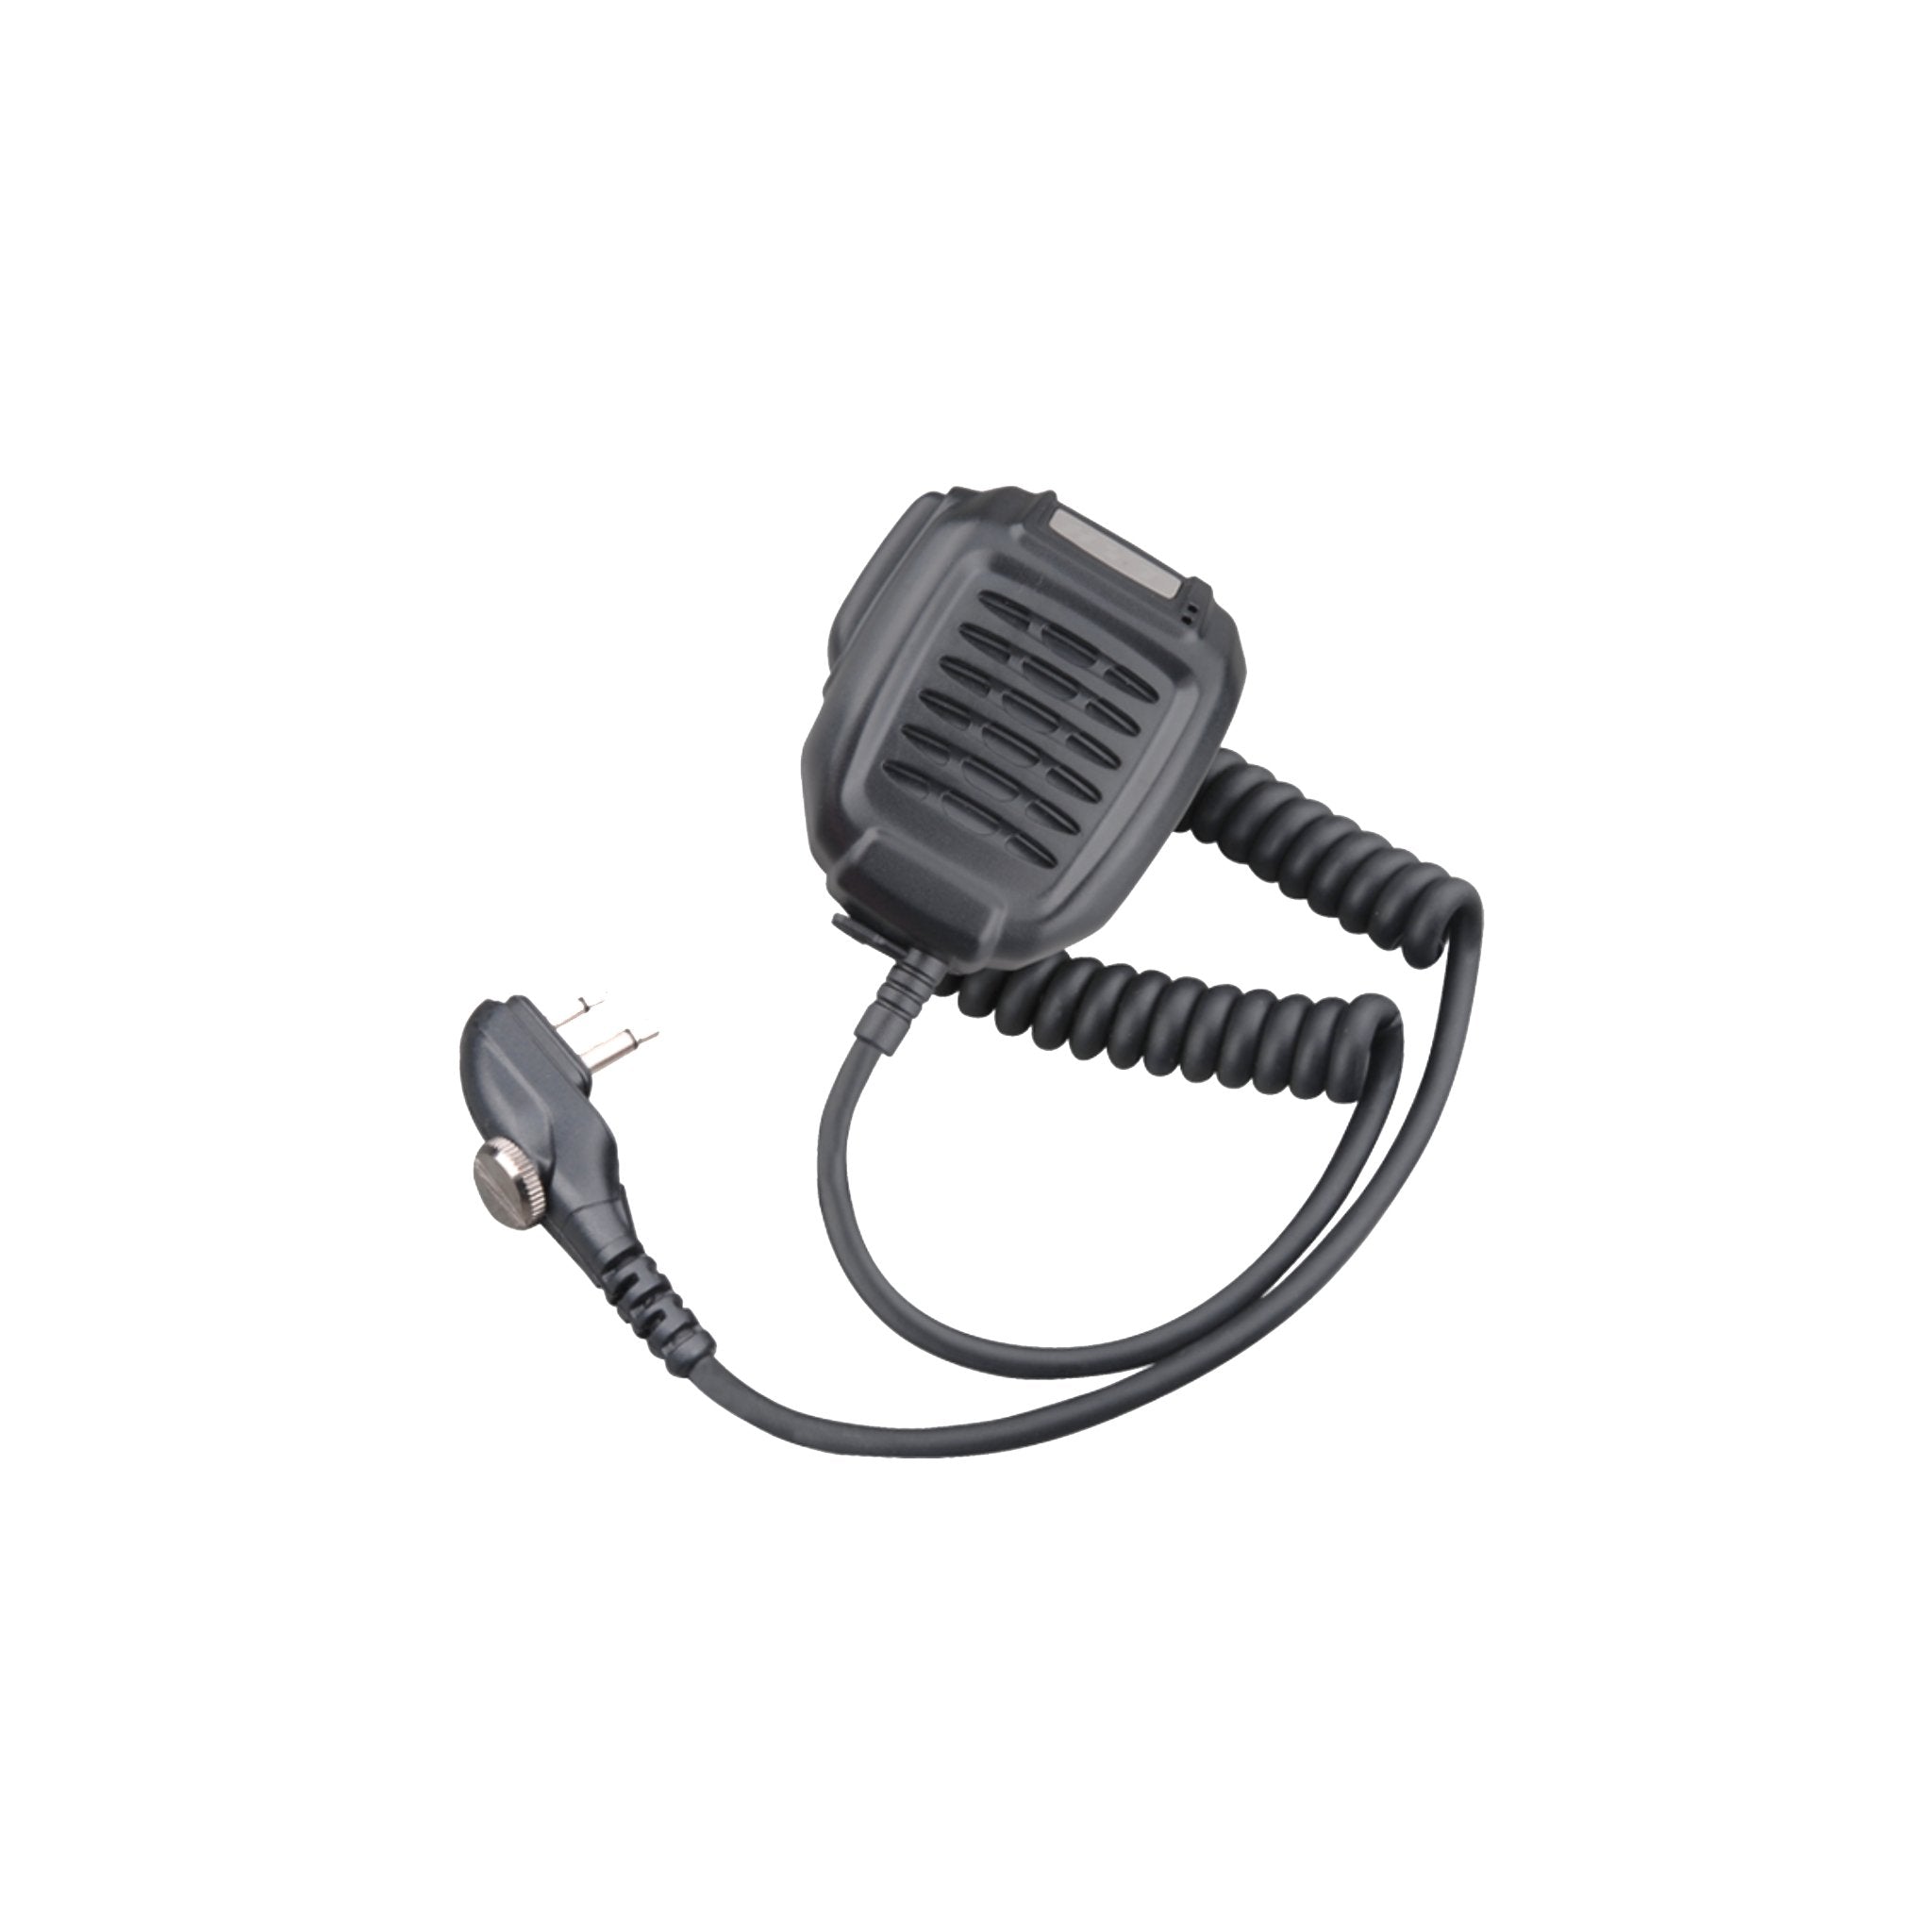 Hytera SM26N2-P Speaker Microphone with emergency button & 2.5mm audio